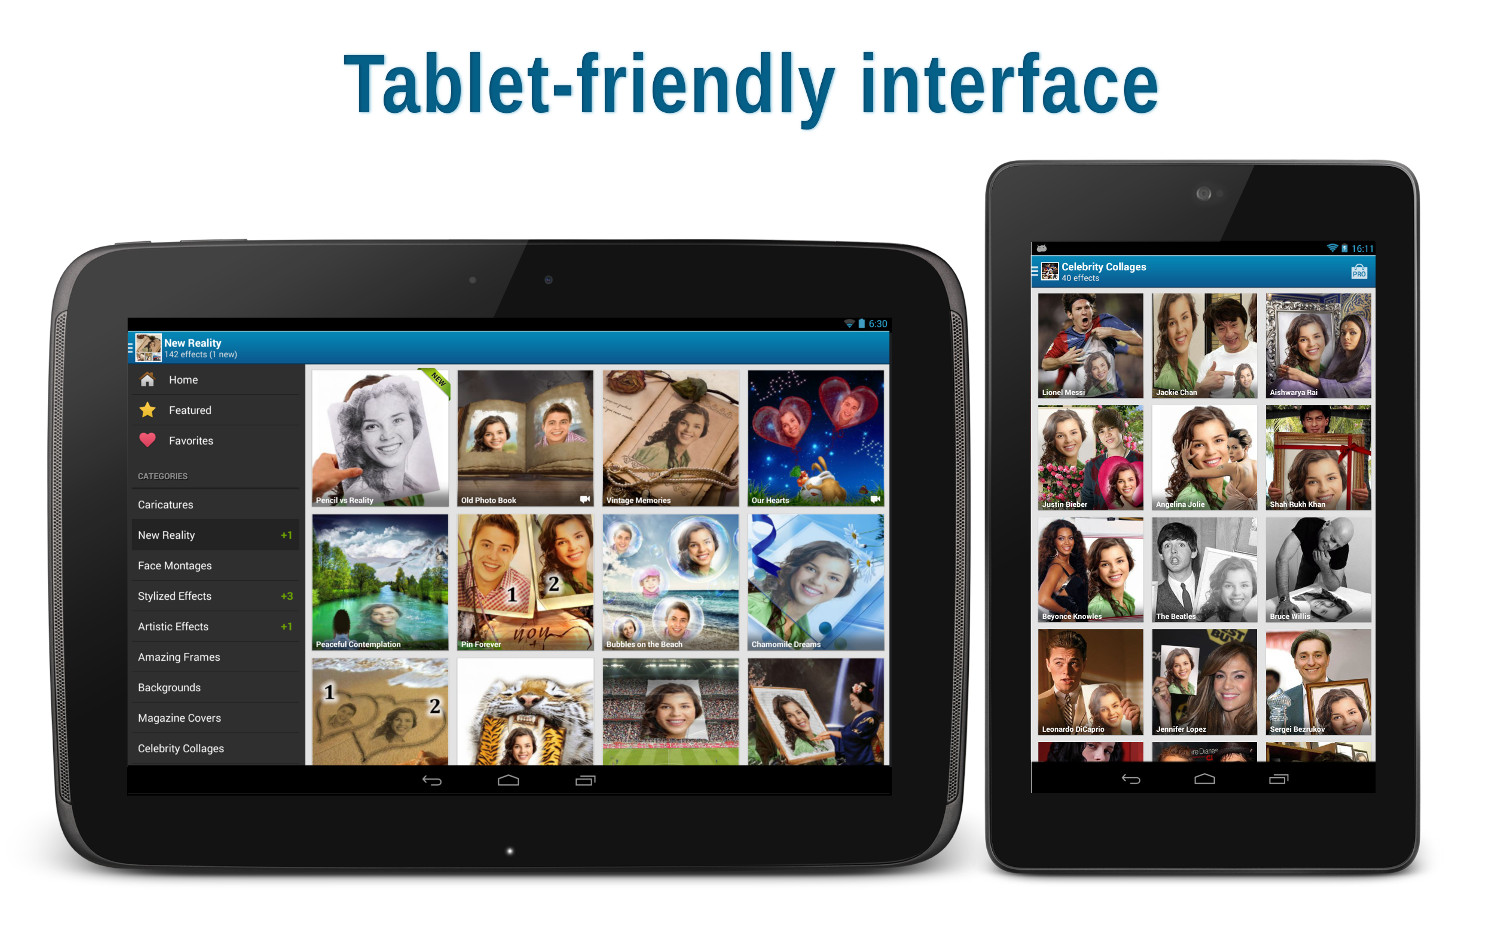 Pho.to Lab 2.0 for Android is now tablet-friendly